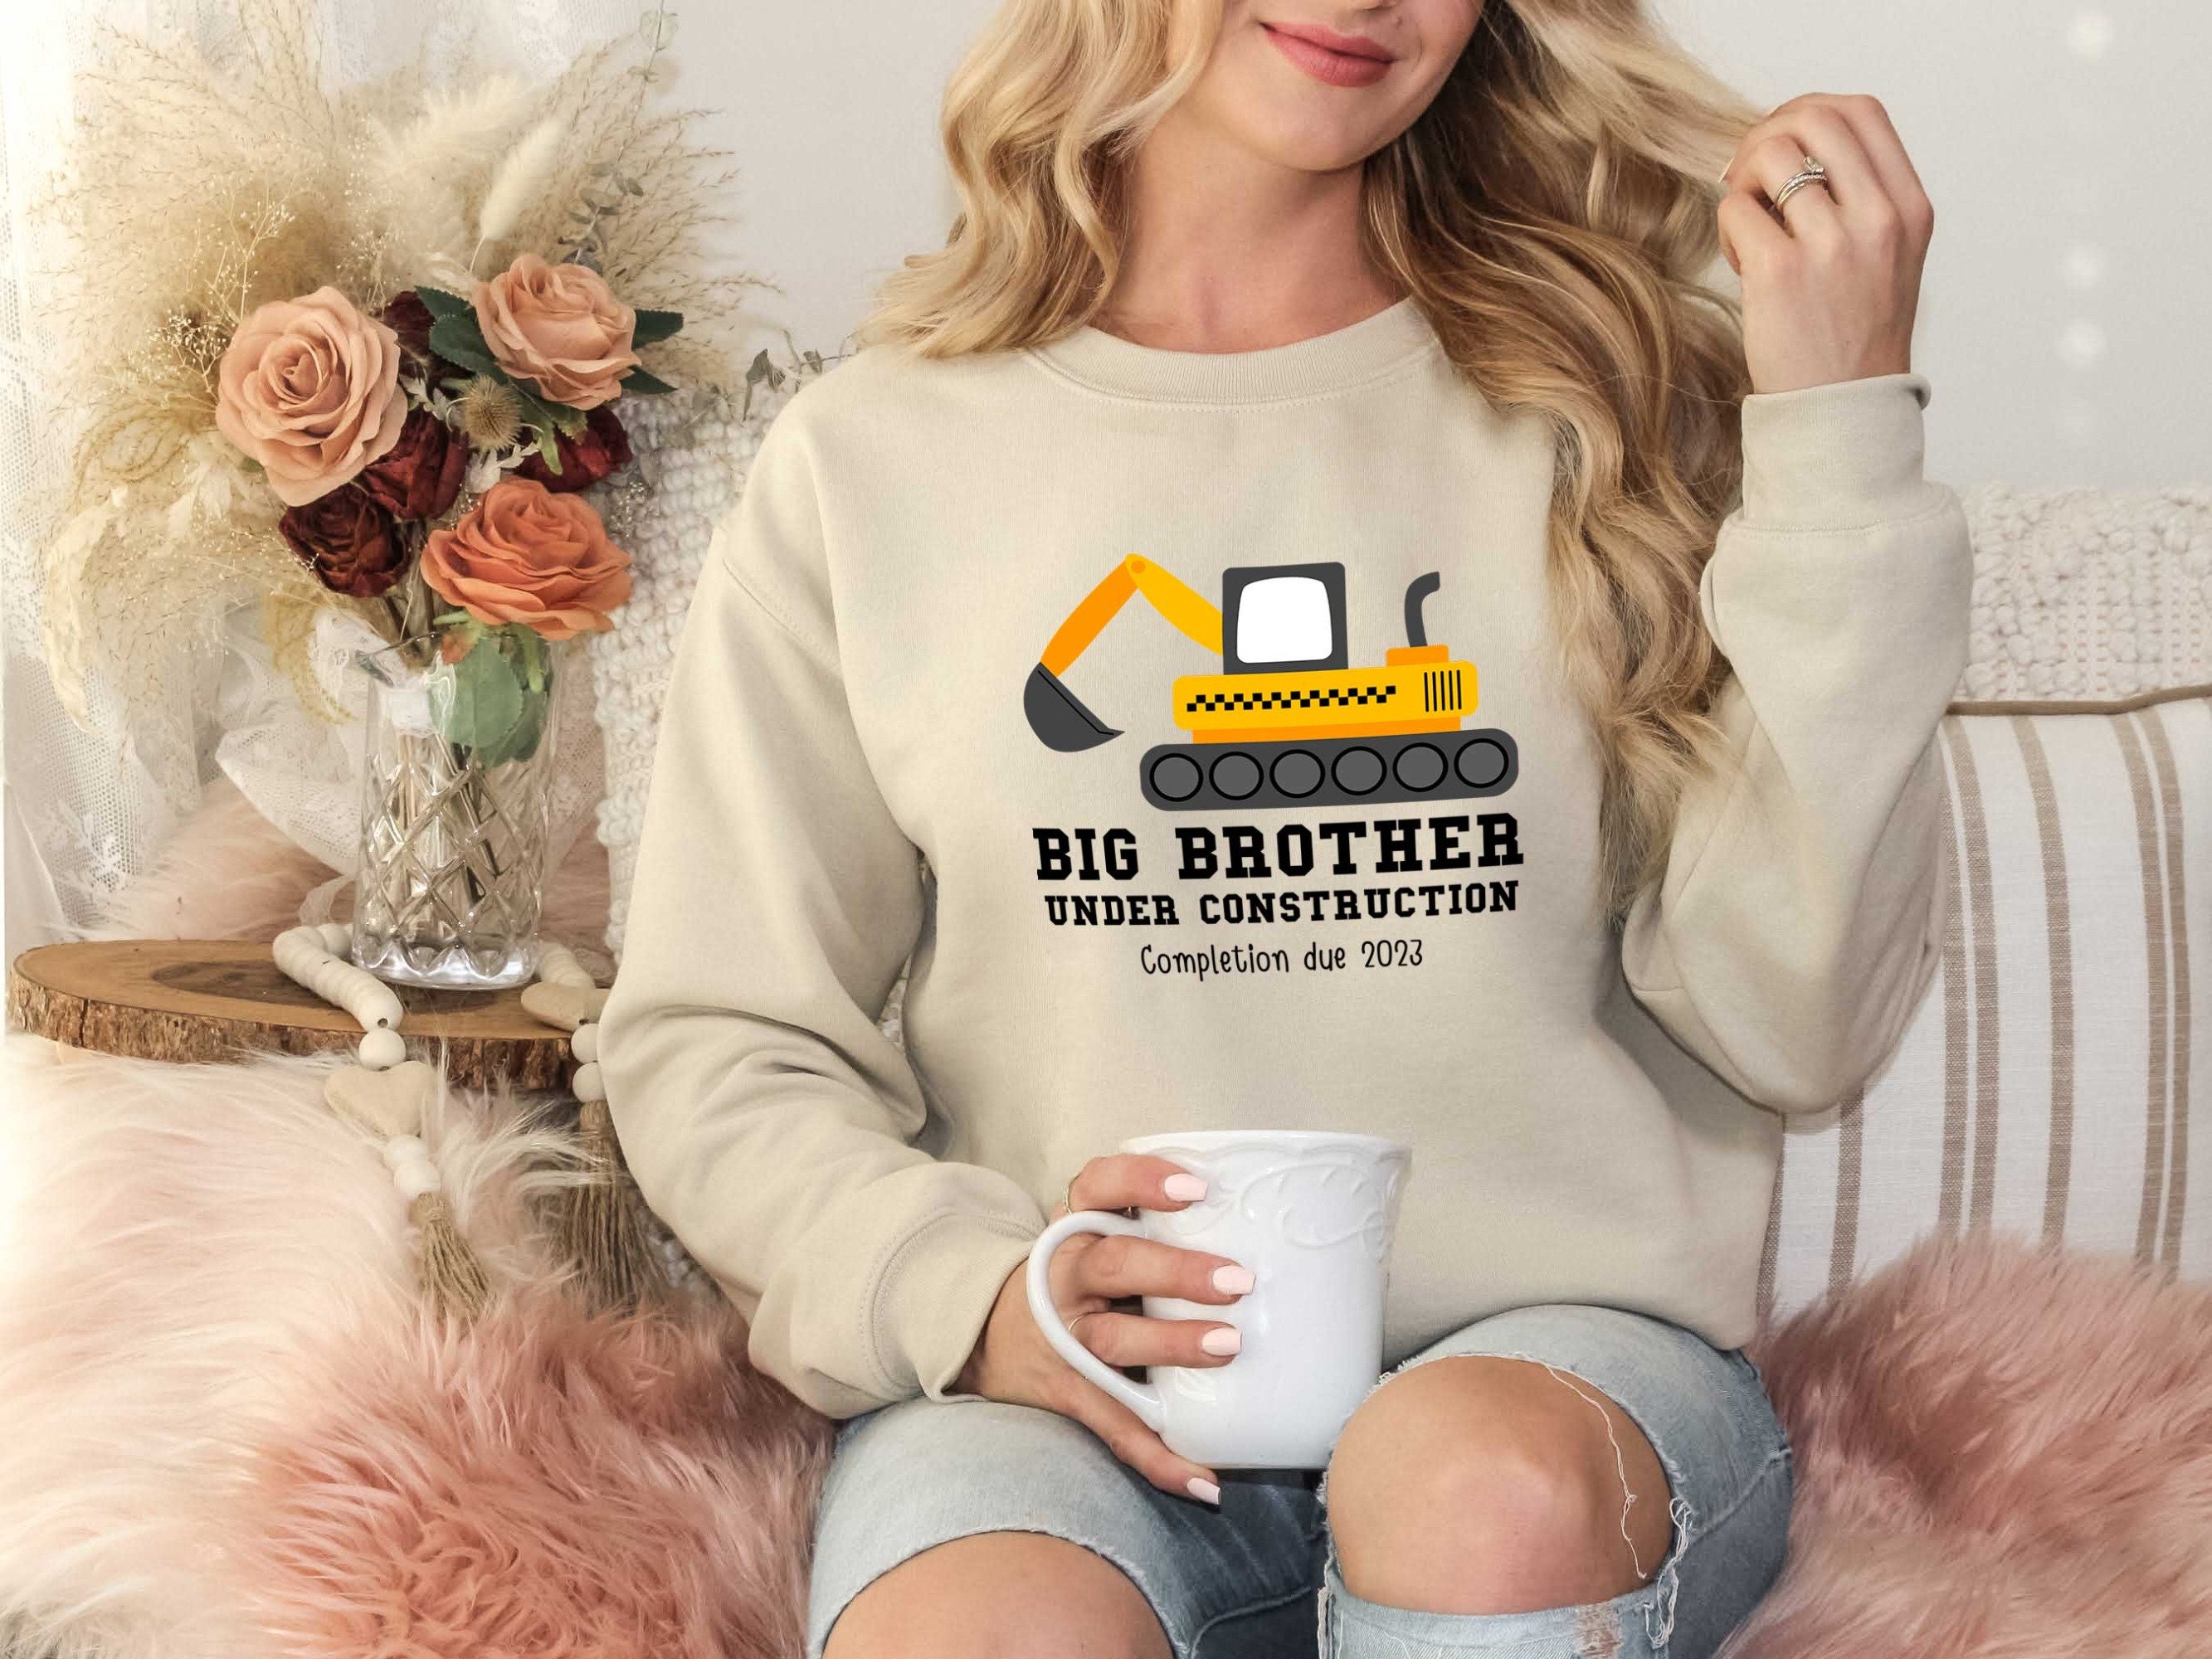 Discover Big Brother Under Construction Shirt, Custom Birth Date Shirt, Birthday Gift for Kids, Big Brother Shirt, Pregnancy Announcement Kids Shirt